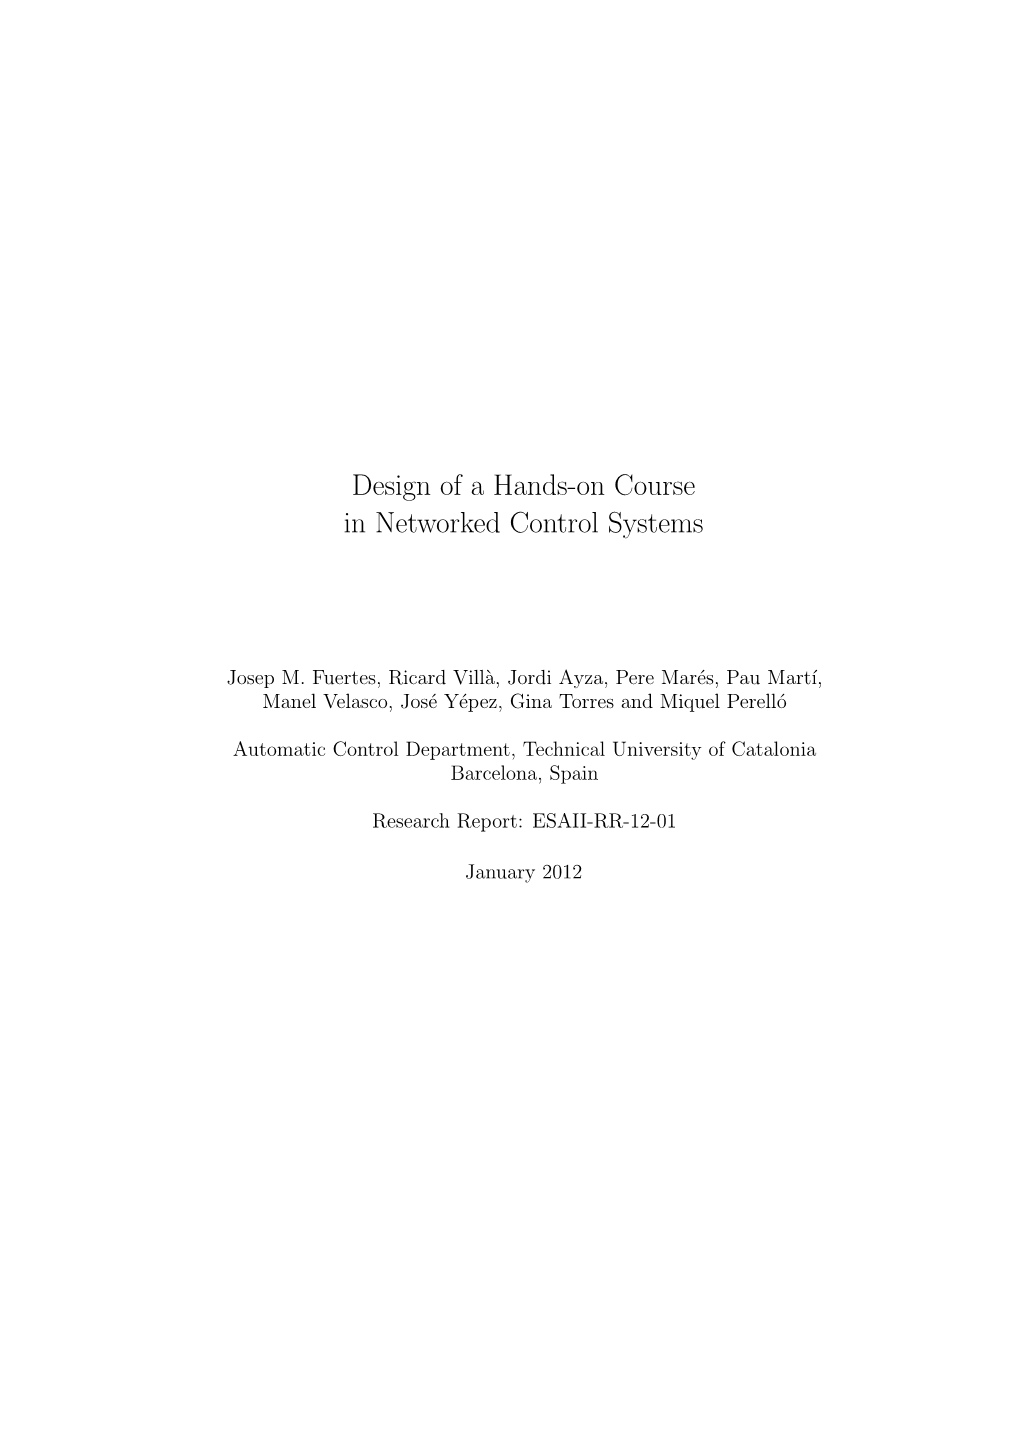 Design of a Hands-On Course in Networked Control Systems